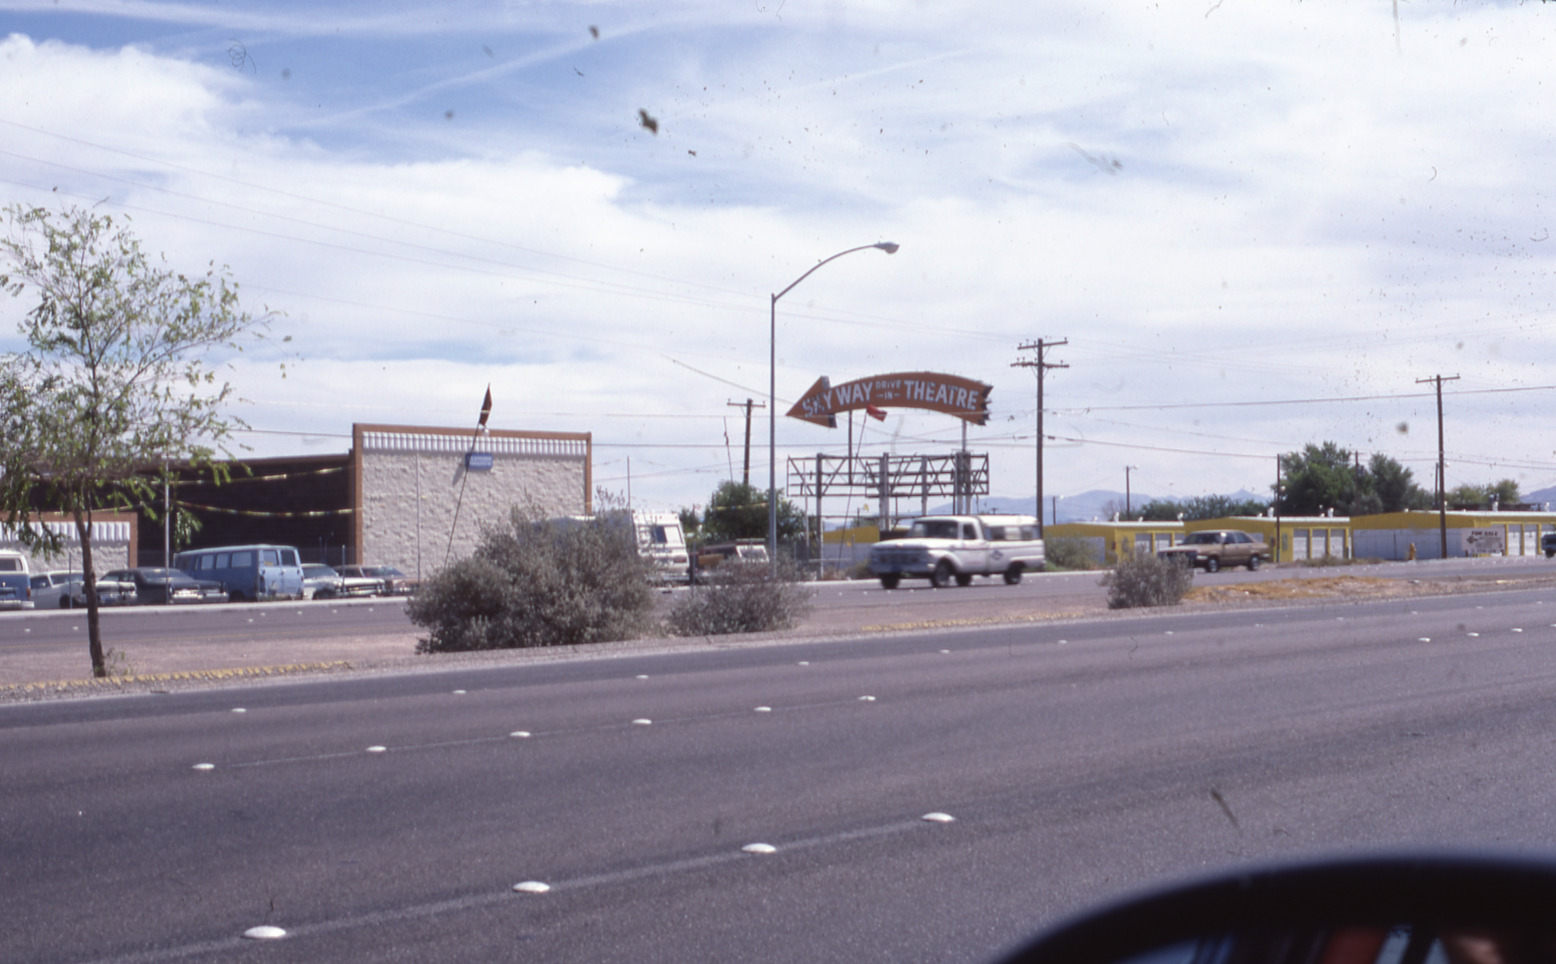 Street view of the Sky Way Drive In Theater dual mounted pylon sign, Las Vegas, Nevada: photographic print